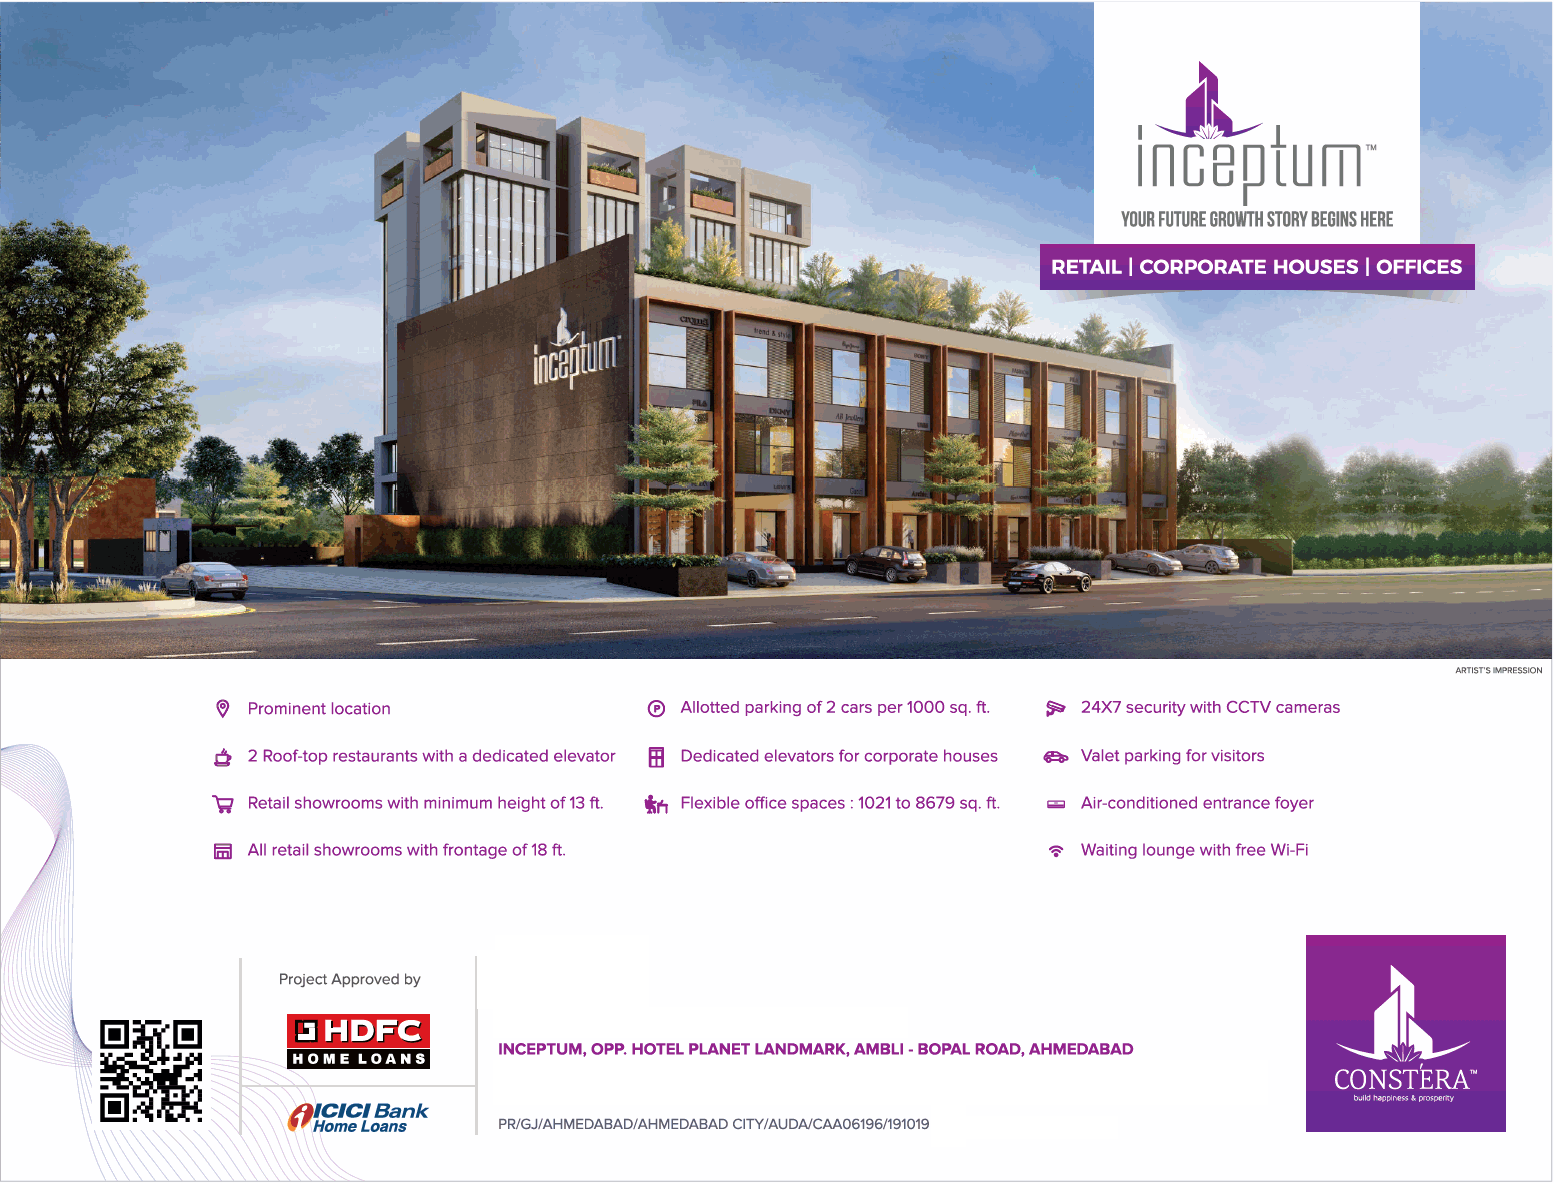 Retail, corporate houses, offices at Constera Inceptum in Ahmedabad